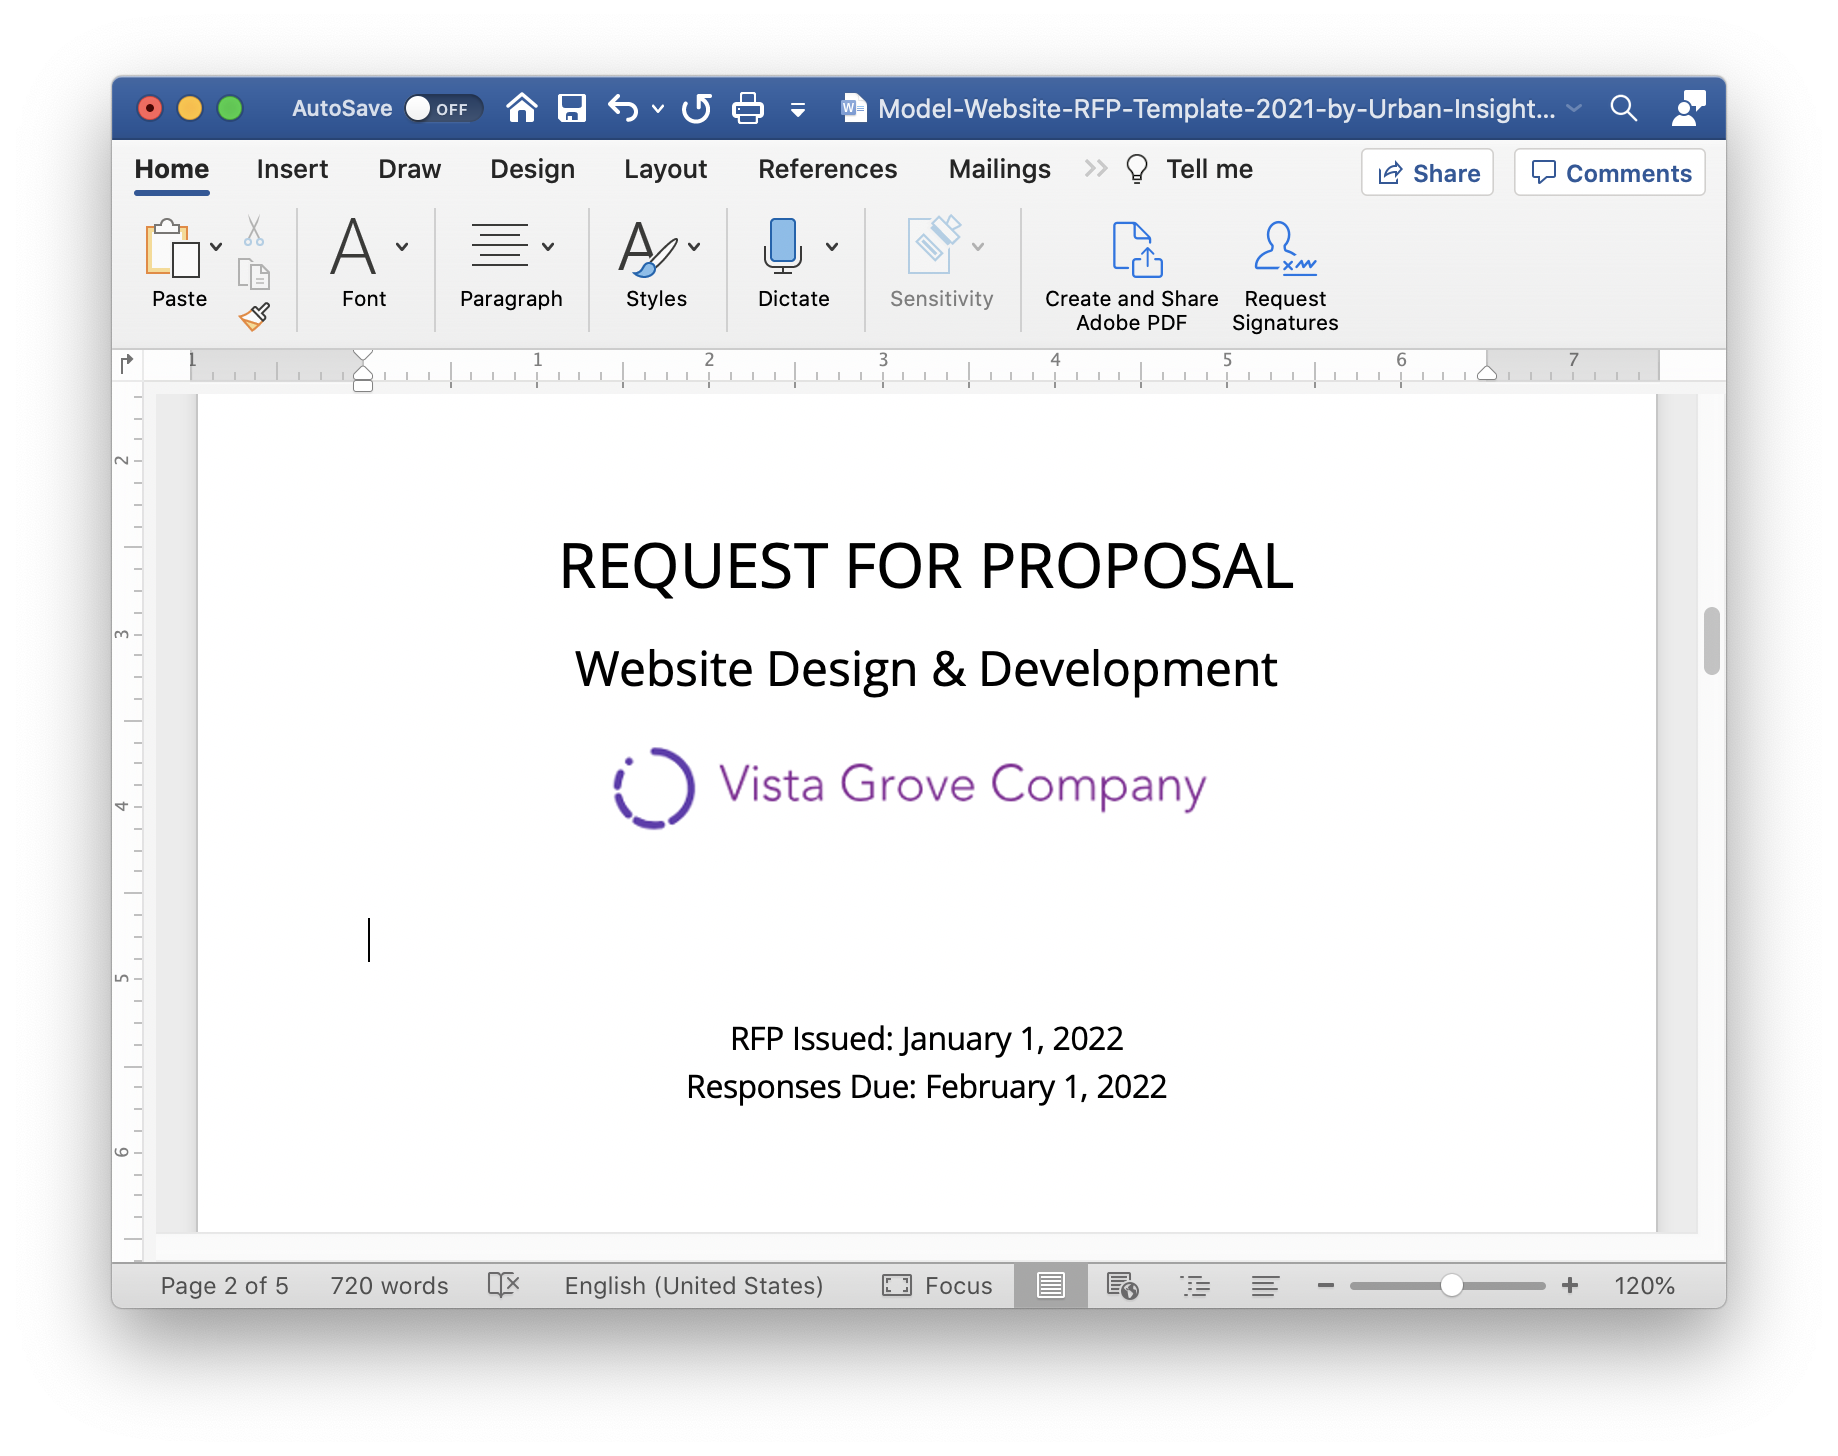 Screenshot of the model website redesign request for proposal RFP template